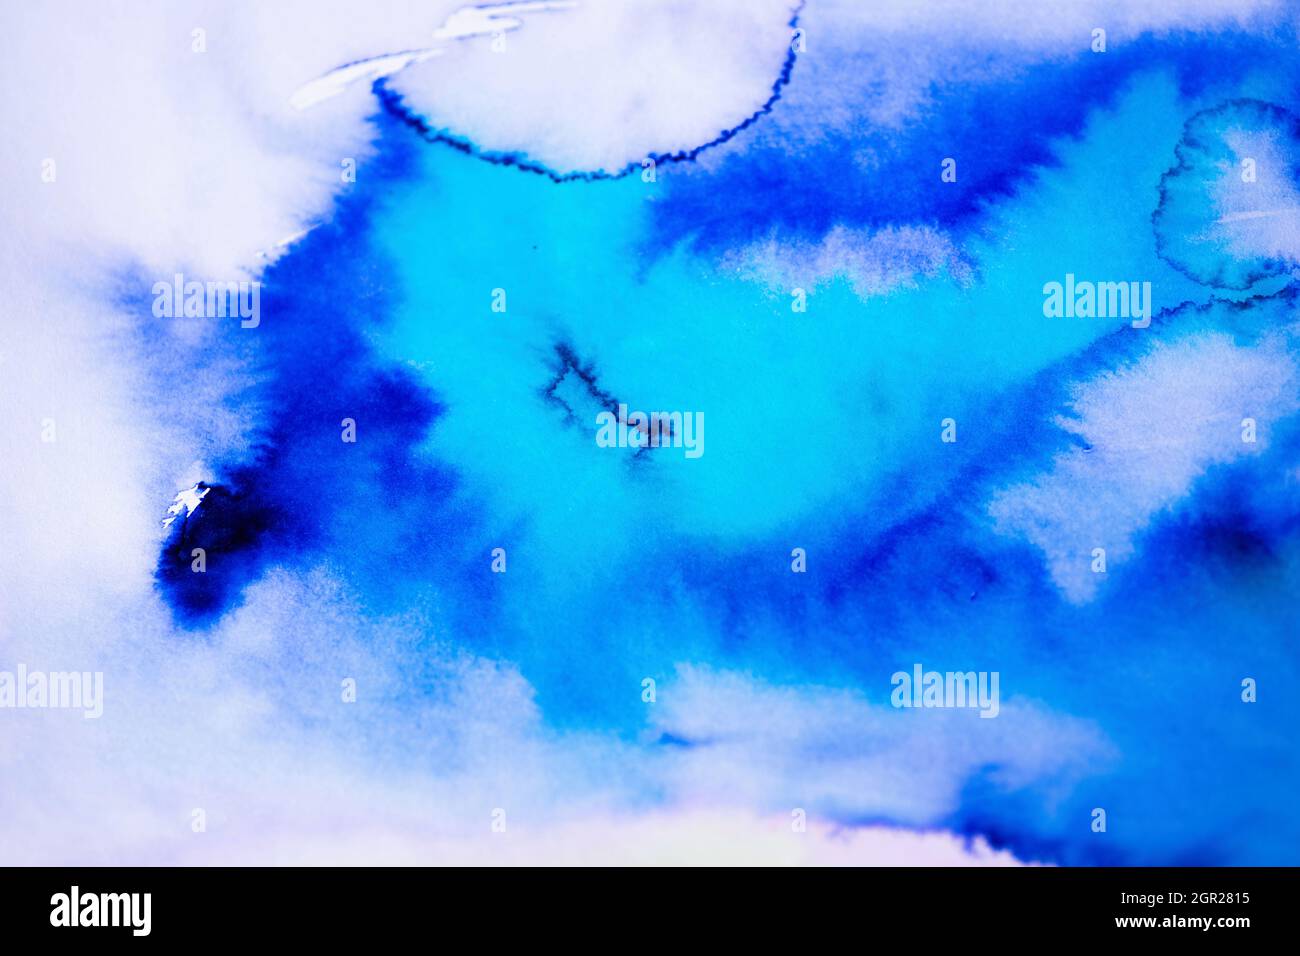 Blue spots, abstract watercolor hand painted background, aniline color, aquarelle. Stock Photo